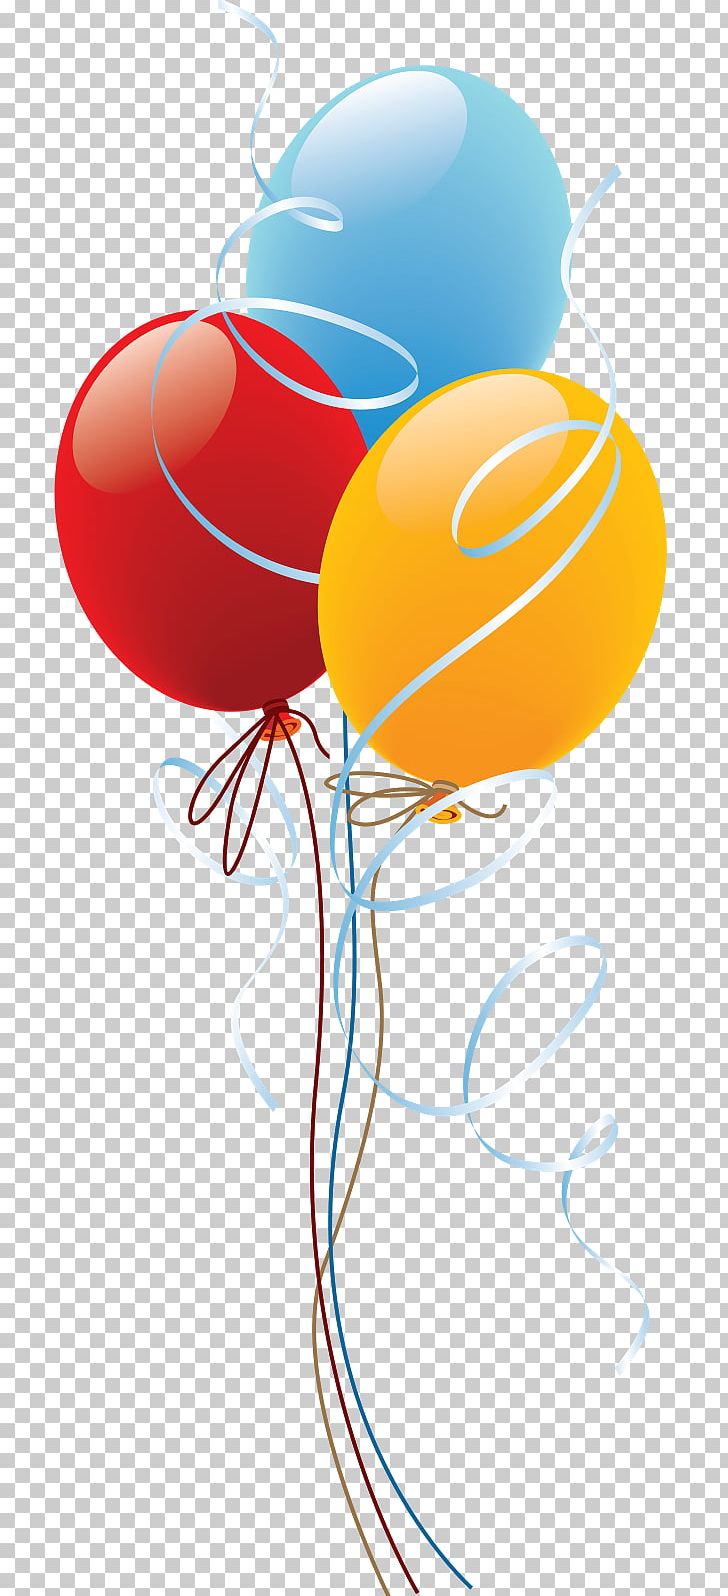 Birthday Cake Balloon Party PNG, Clipart, Ball, Balloon, Birthday, Birthday Cake, Cake Free PNG Download